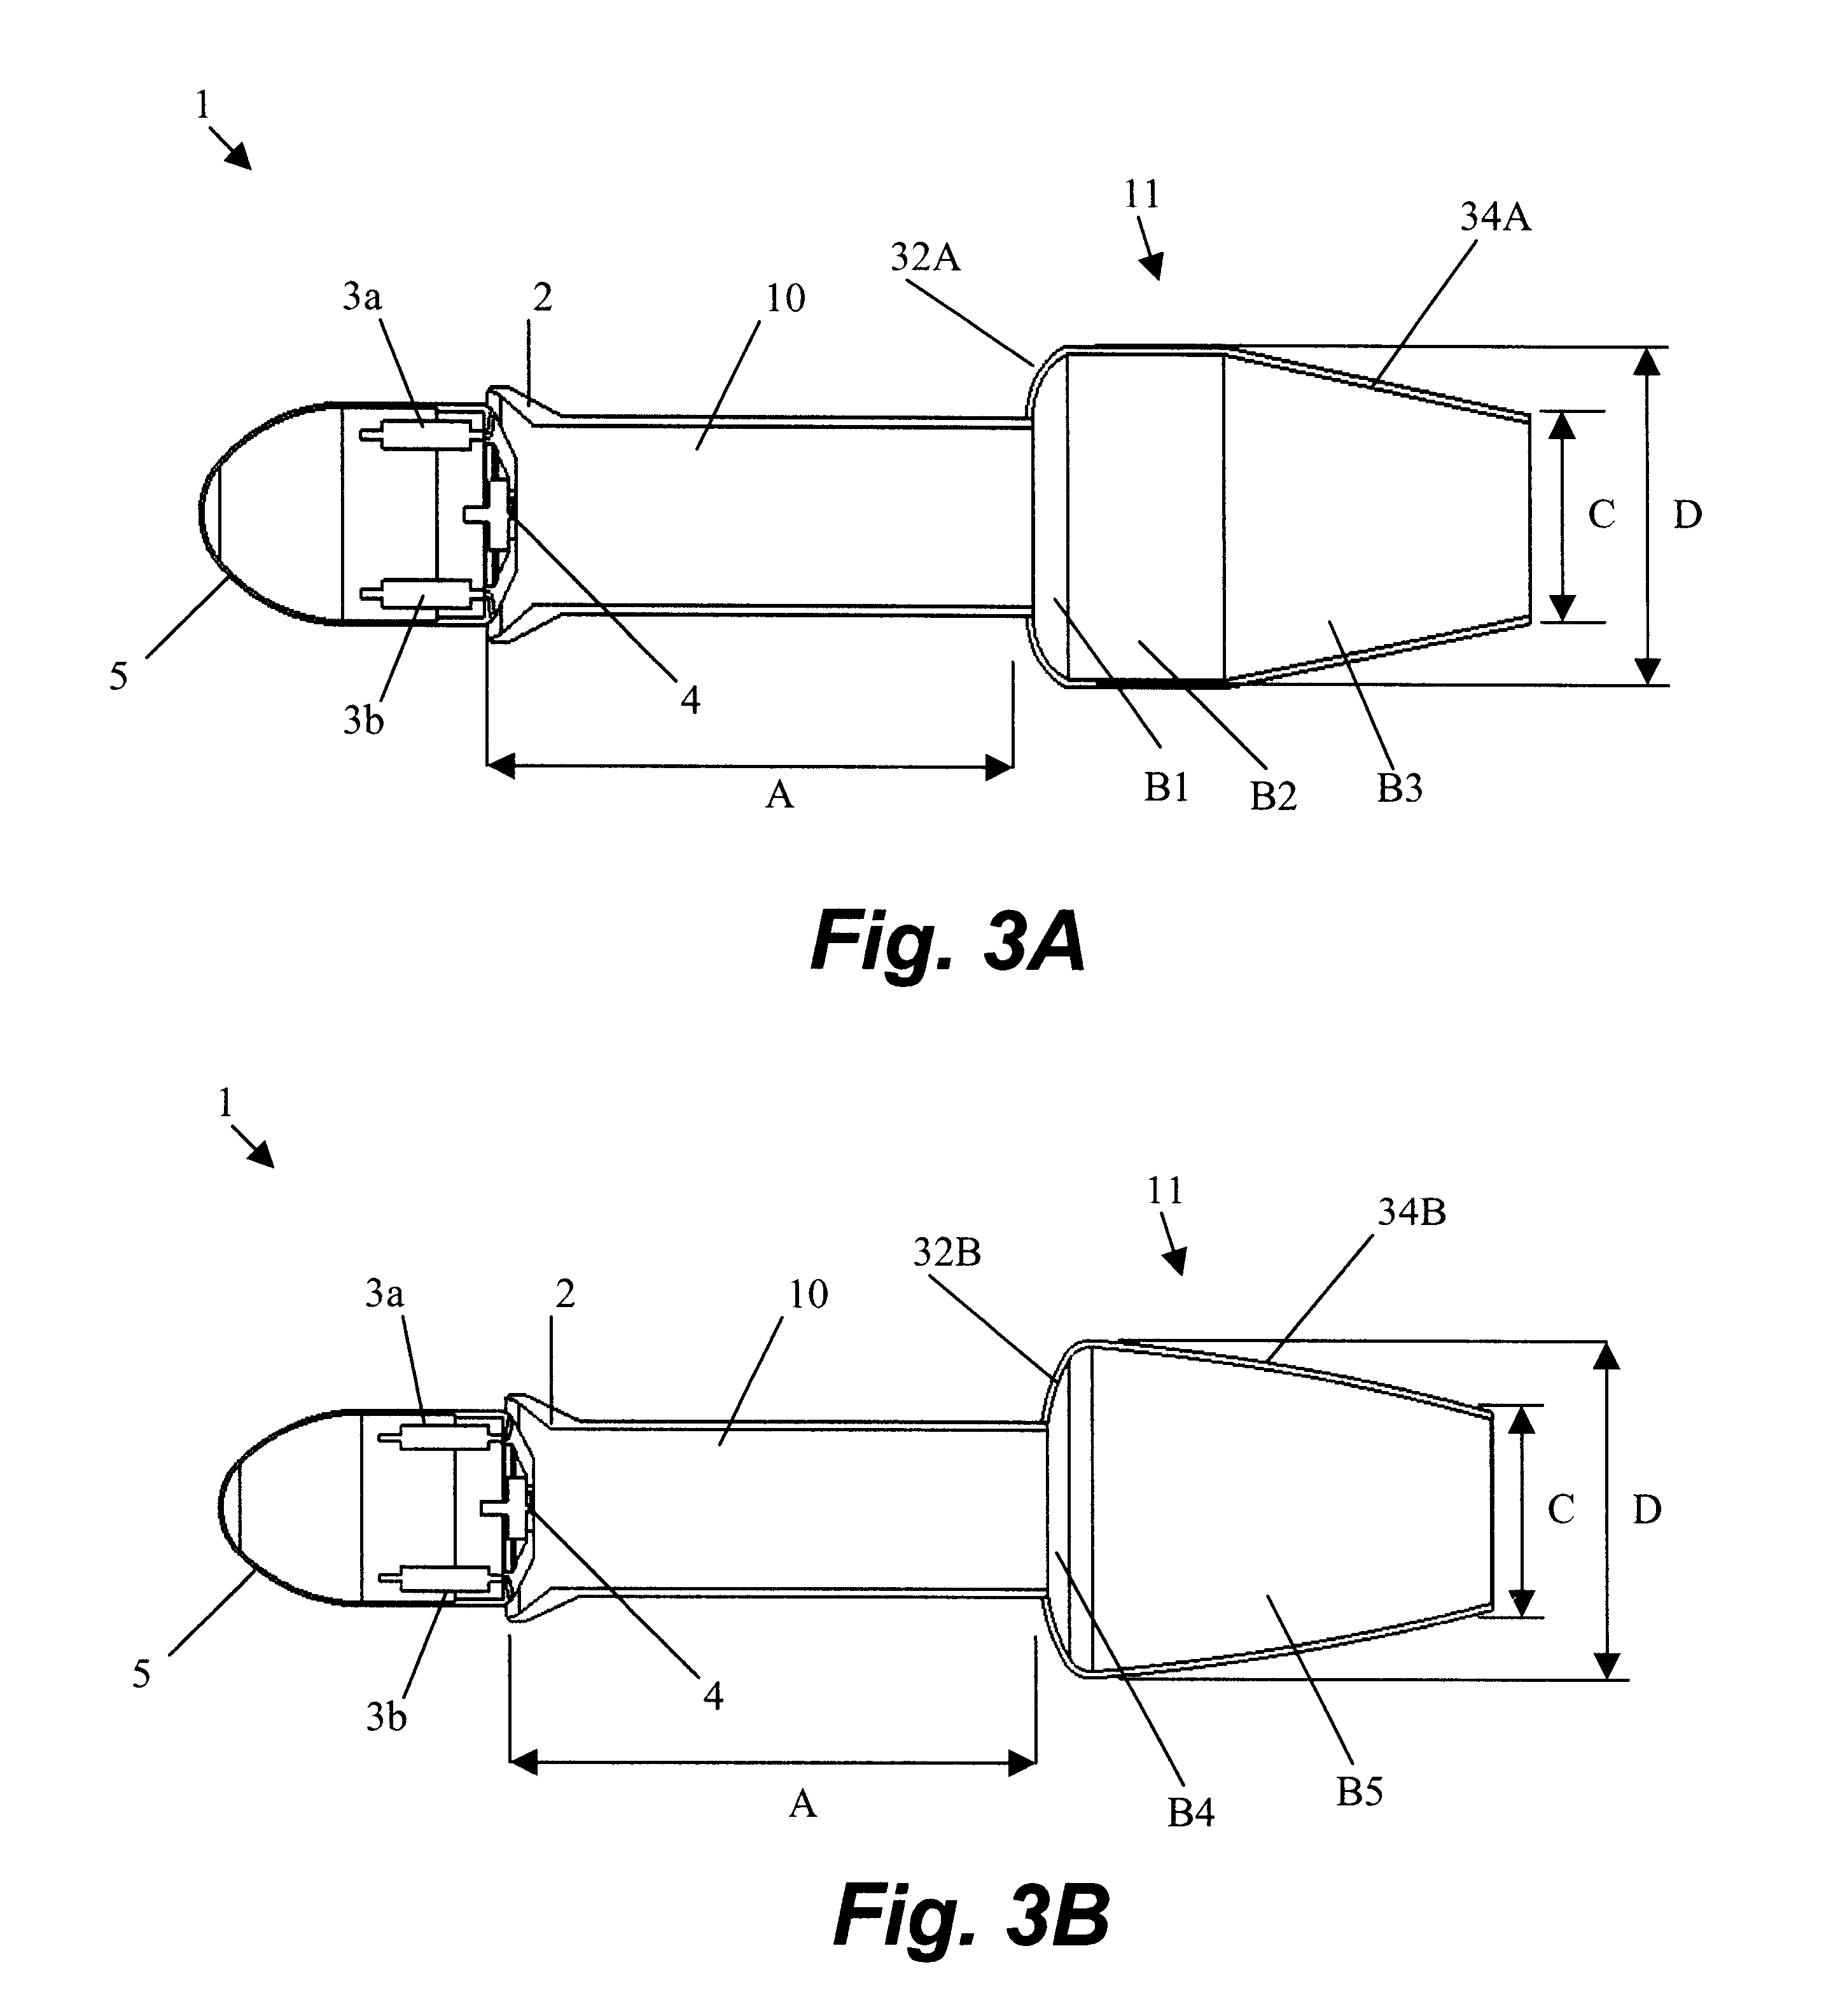 Method and apparatus for improving the efficiency of pulsed detonation engines